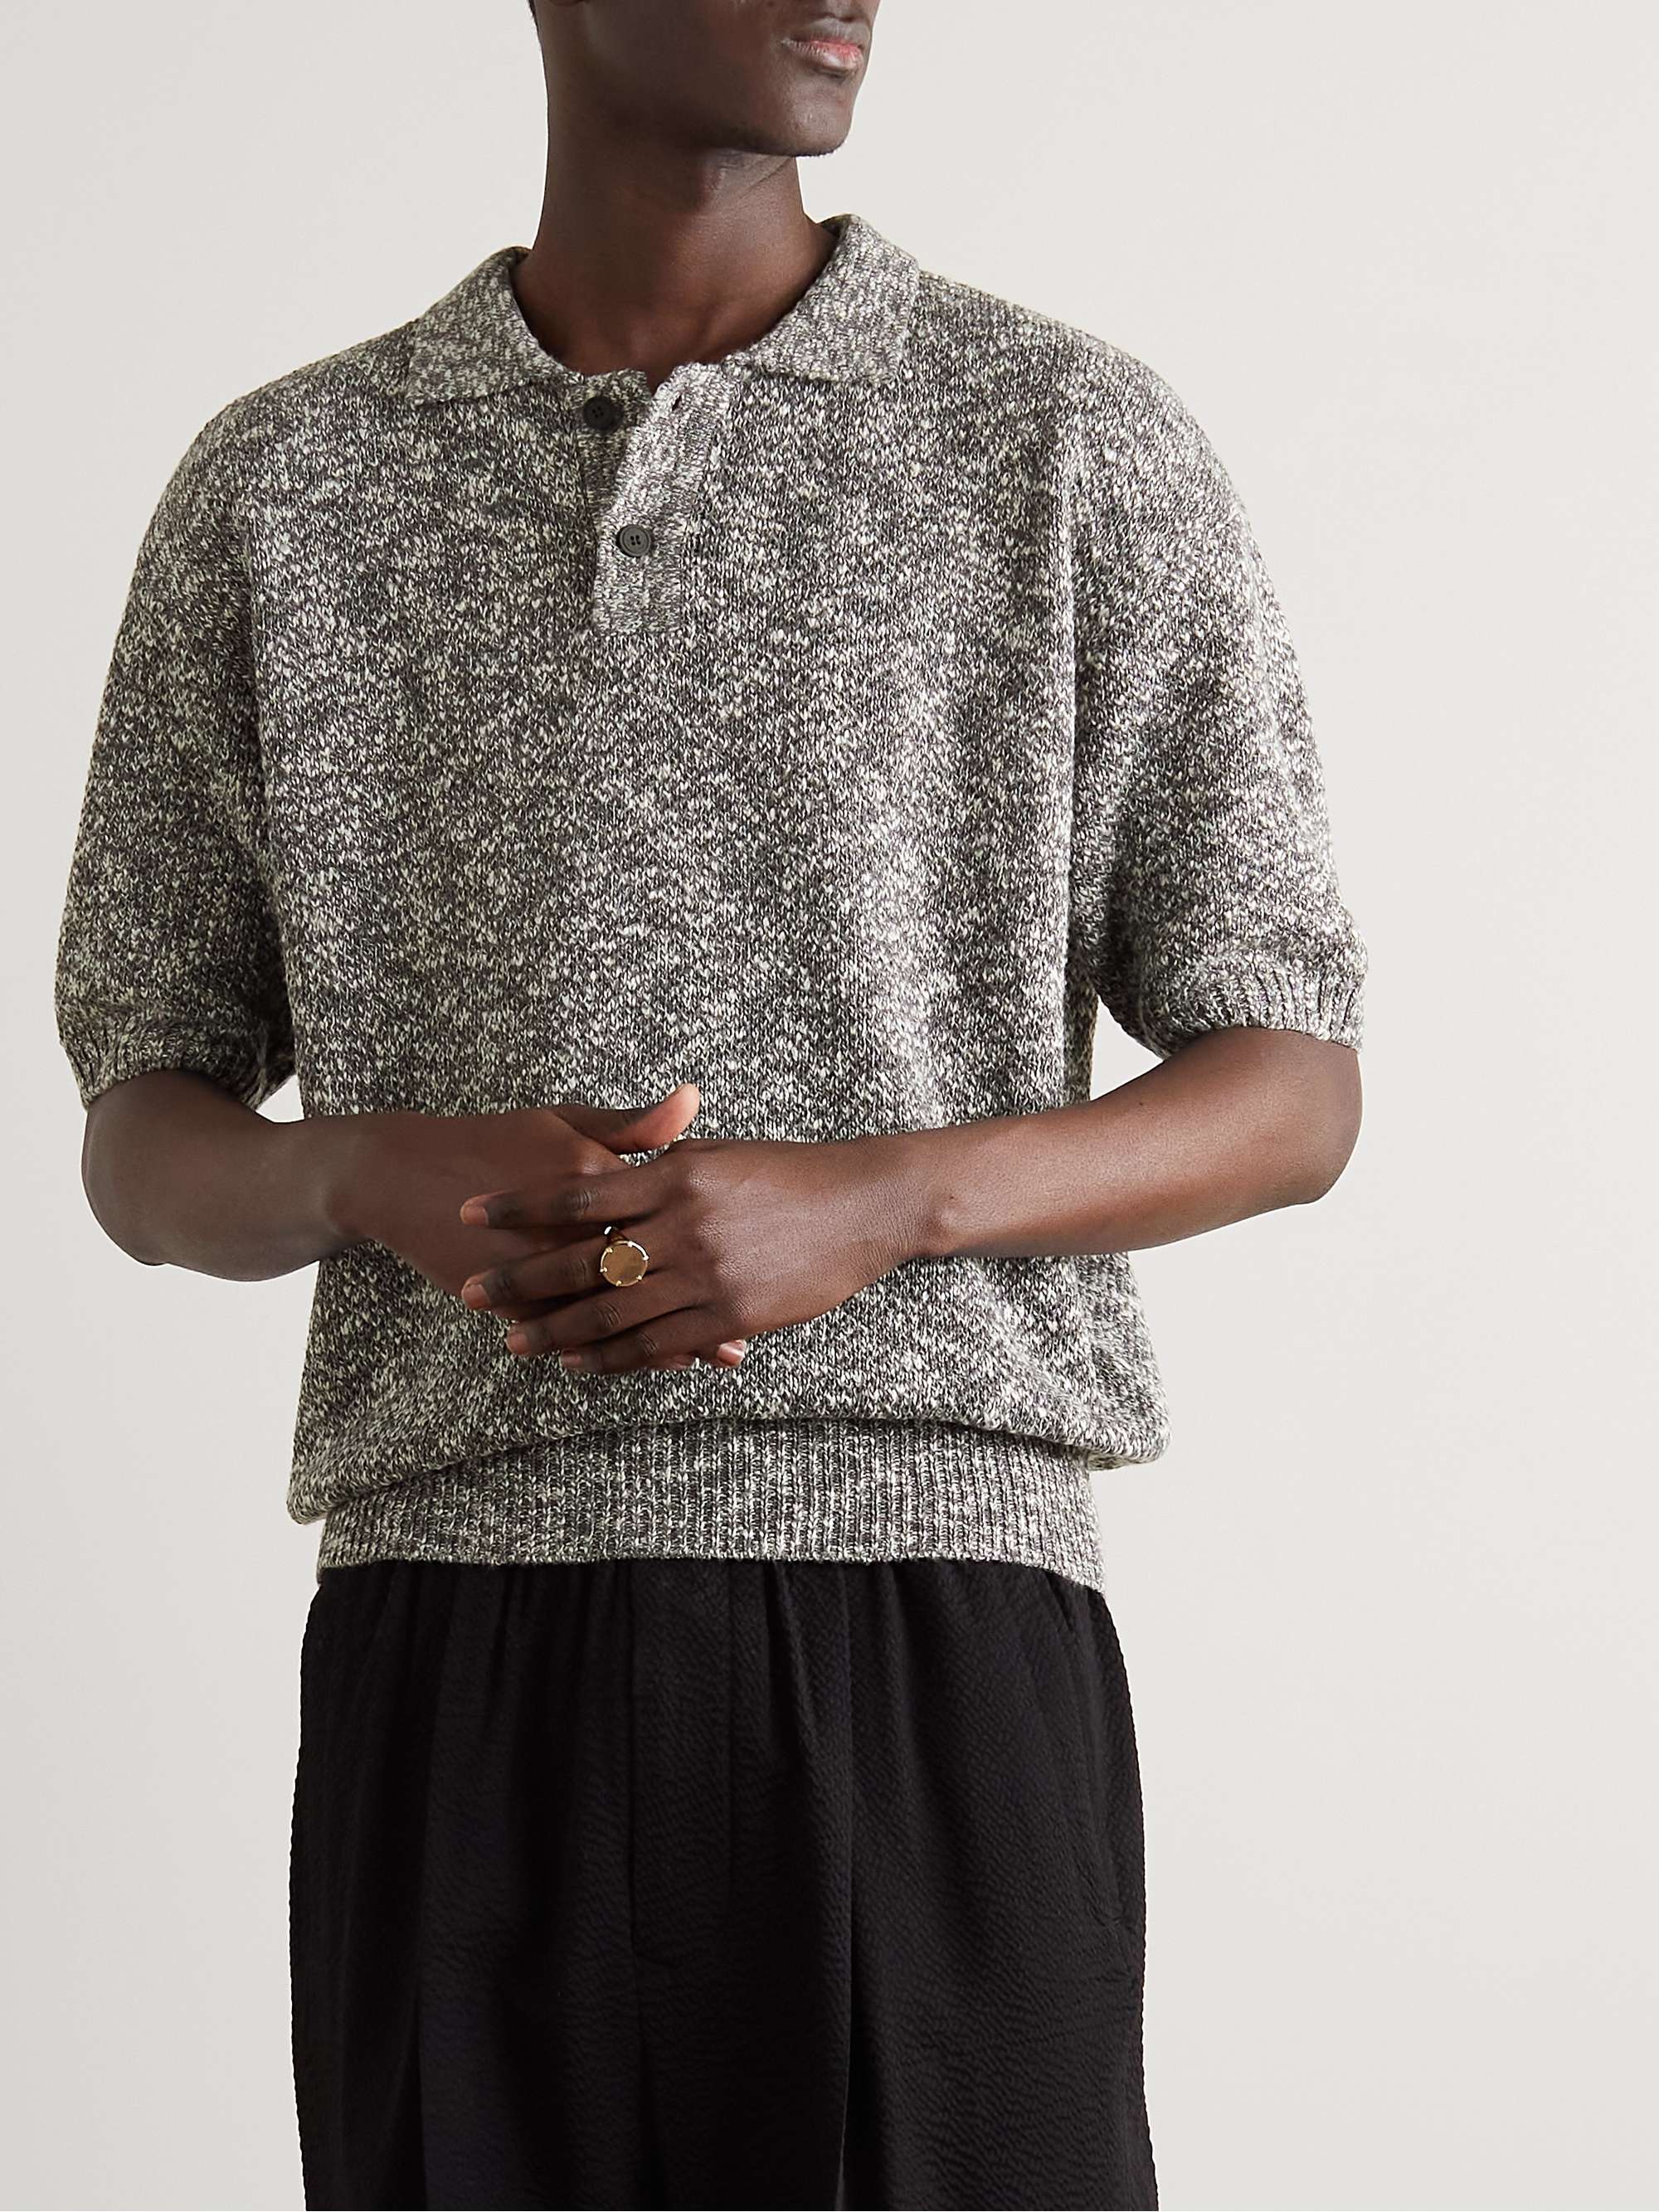 LE 17 SEPTEMBRE Knitted Cotton-Blend Polo Shirt